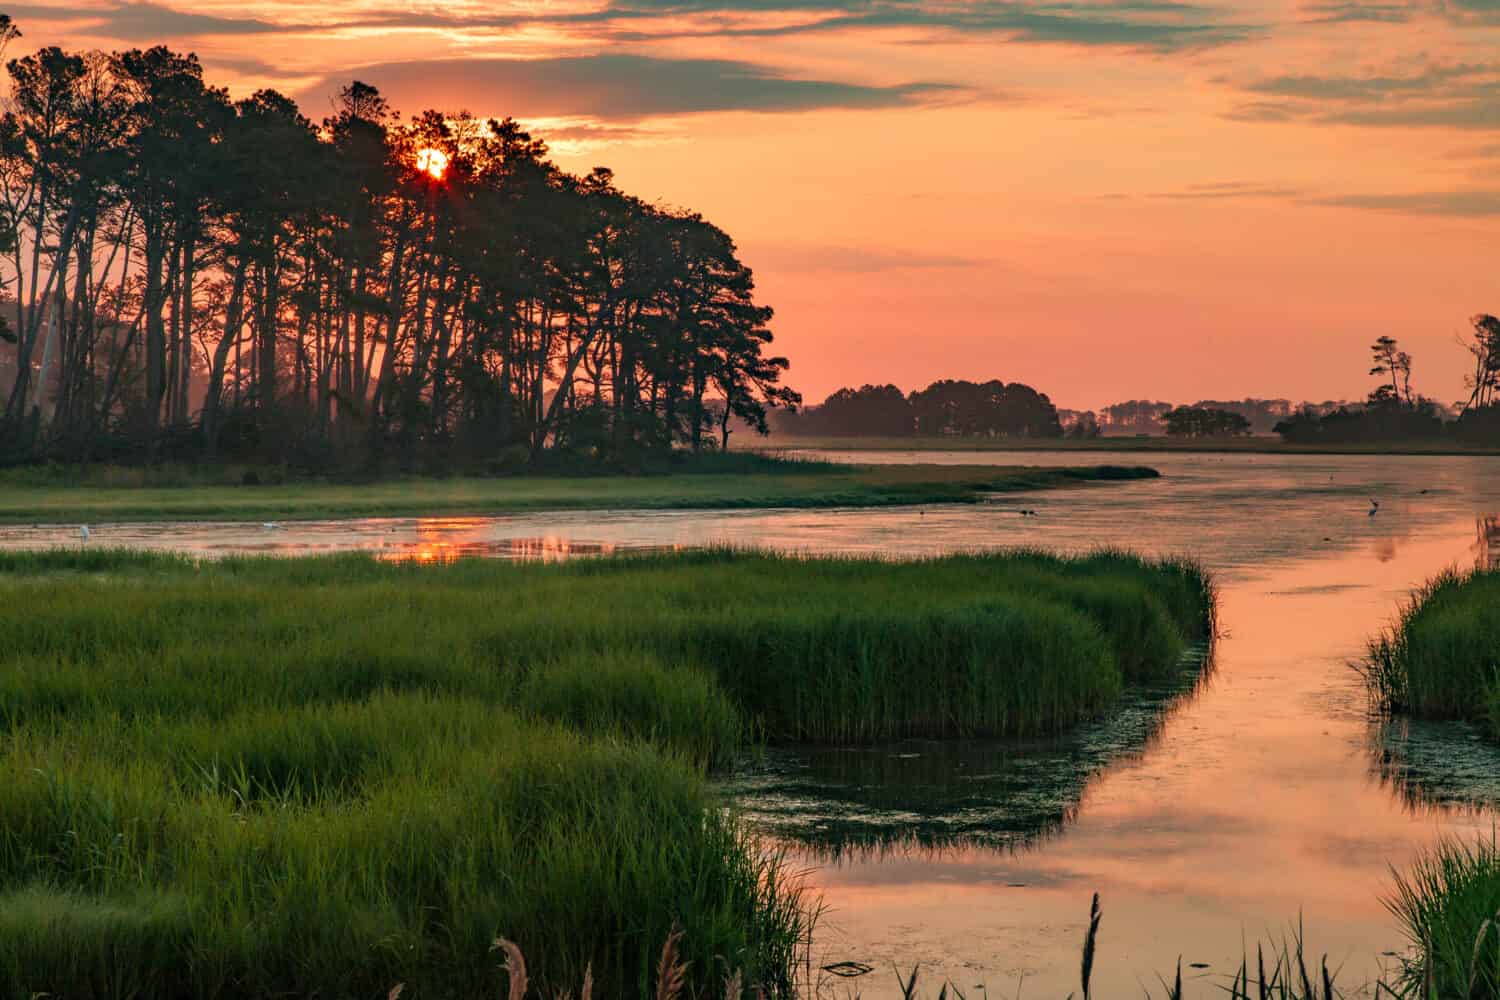 Sunset in the marshes of Chincoteague National Wildlife Refuge in Virginia